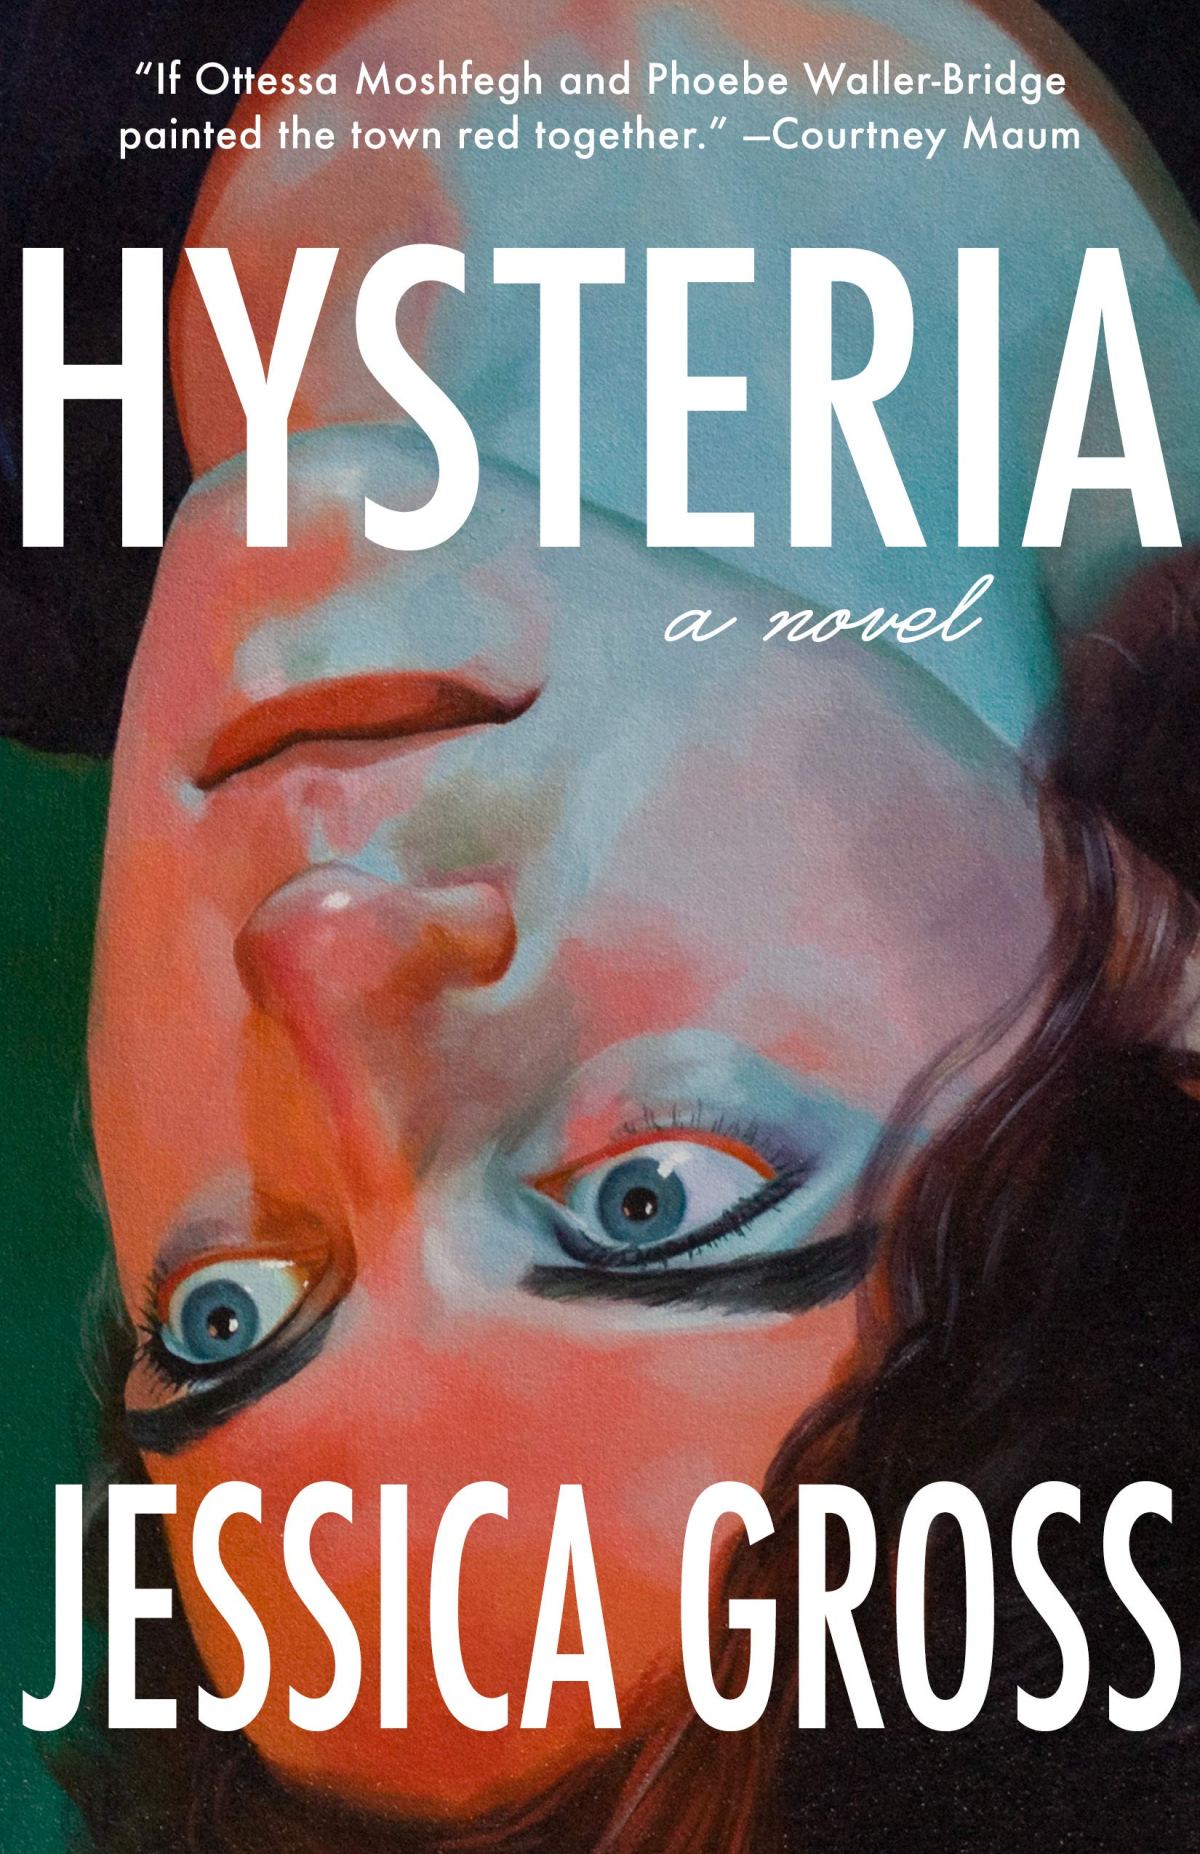 Book 162 – Hysteria by Jessica Gross